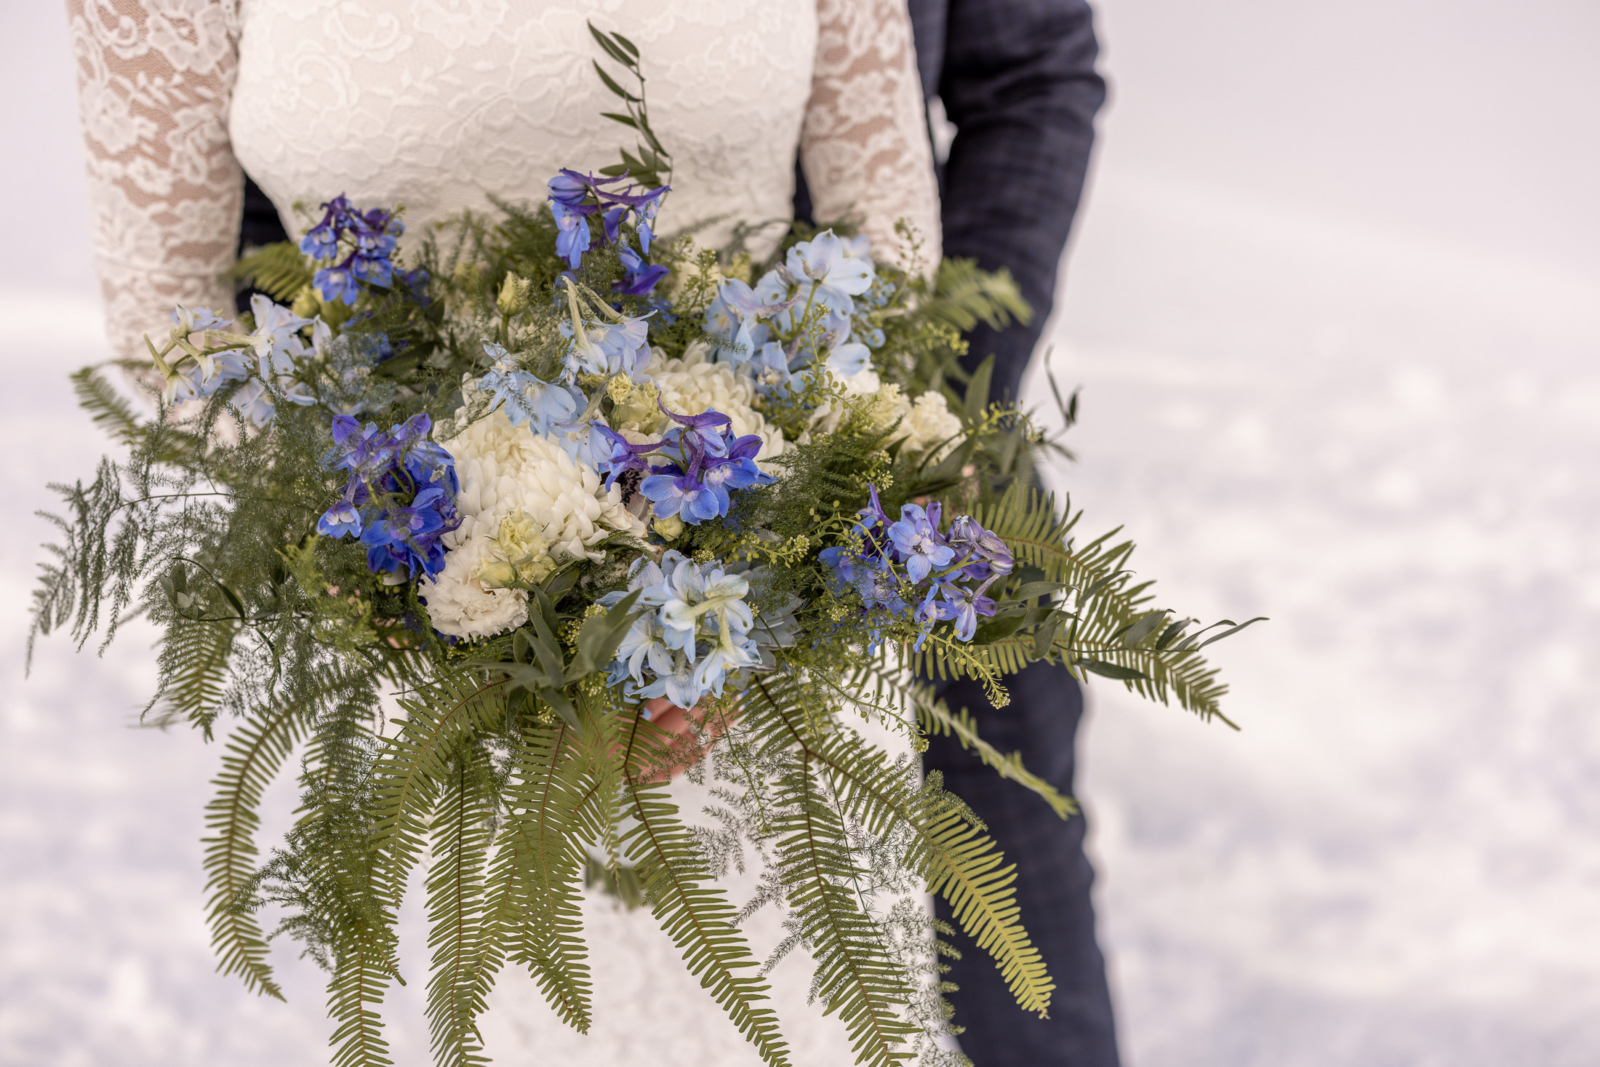 Bridal Bouquet at the winter wedding